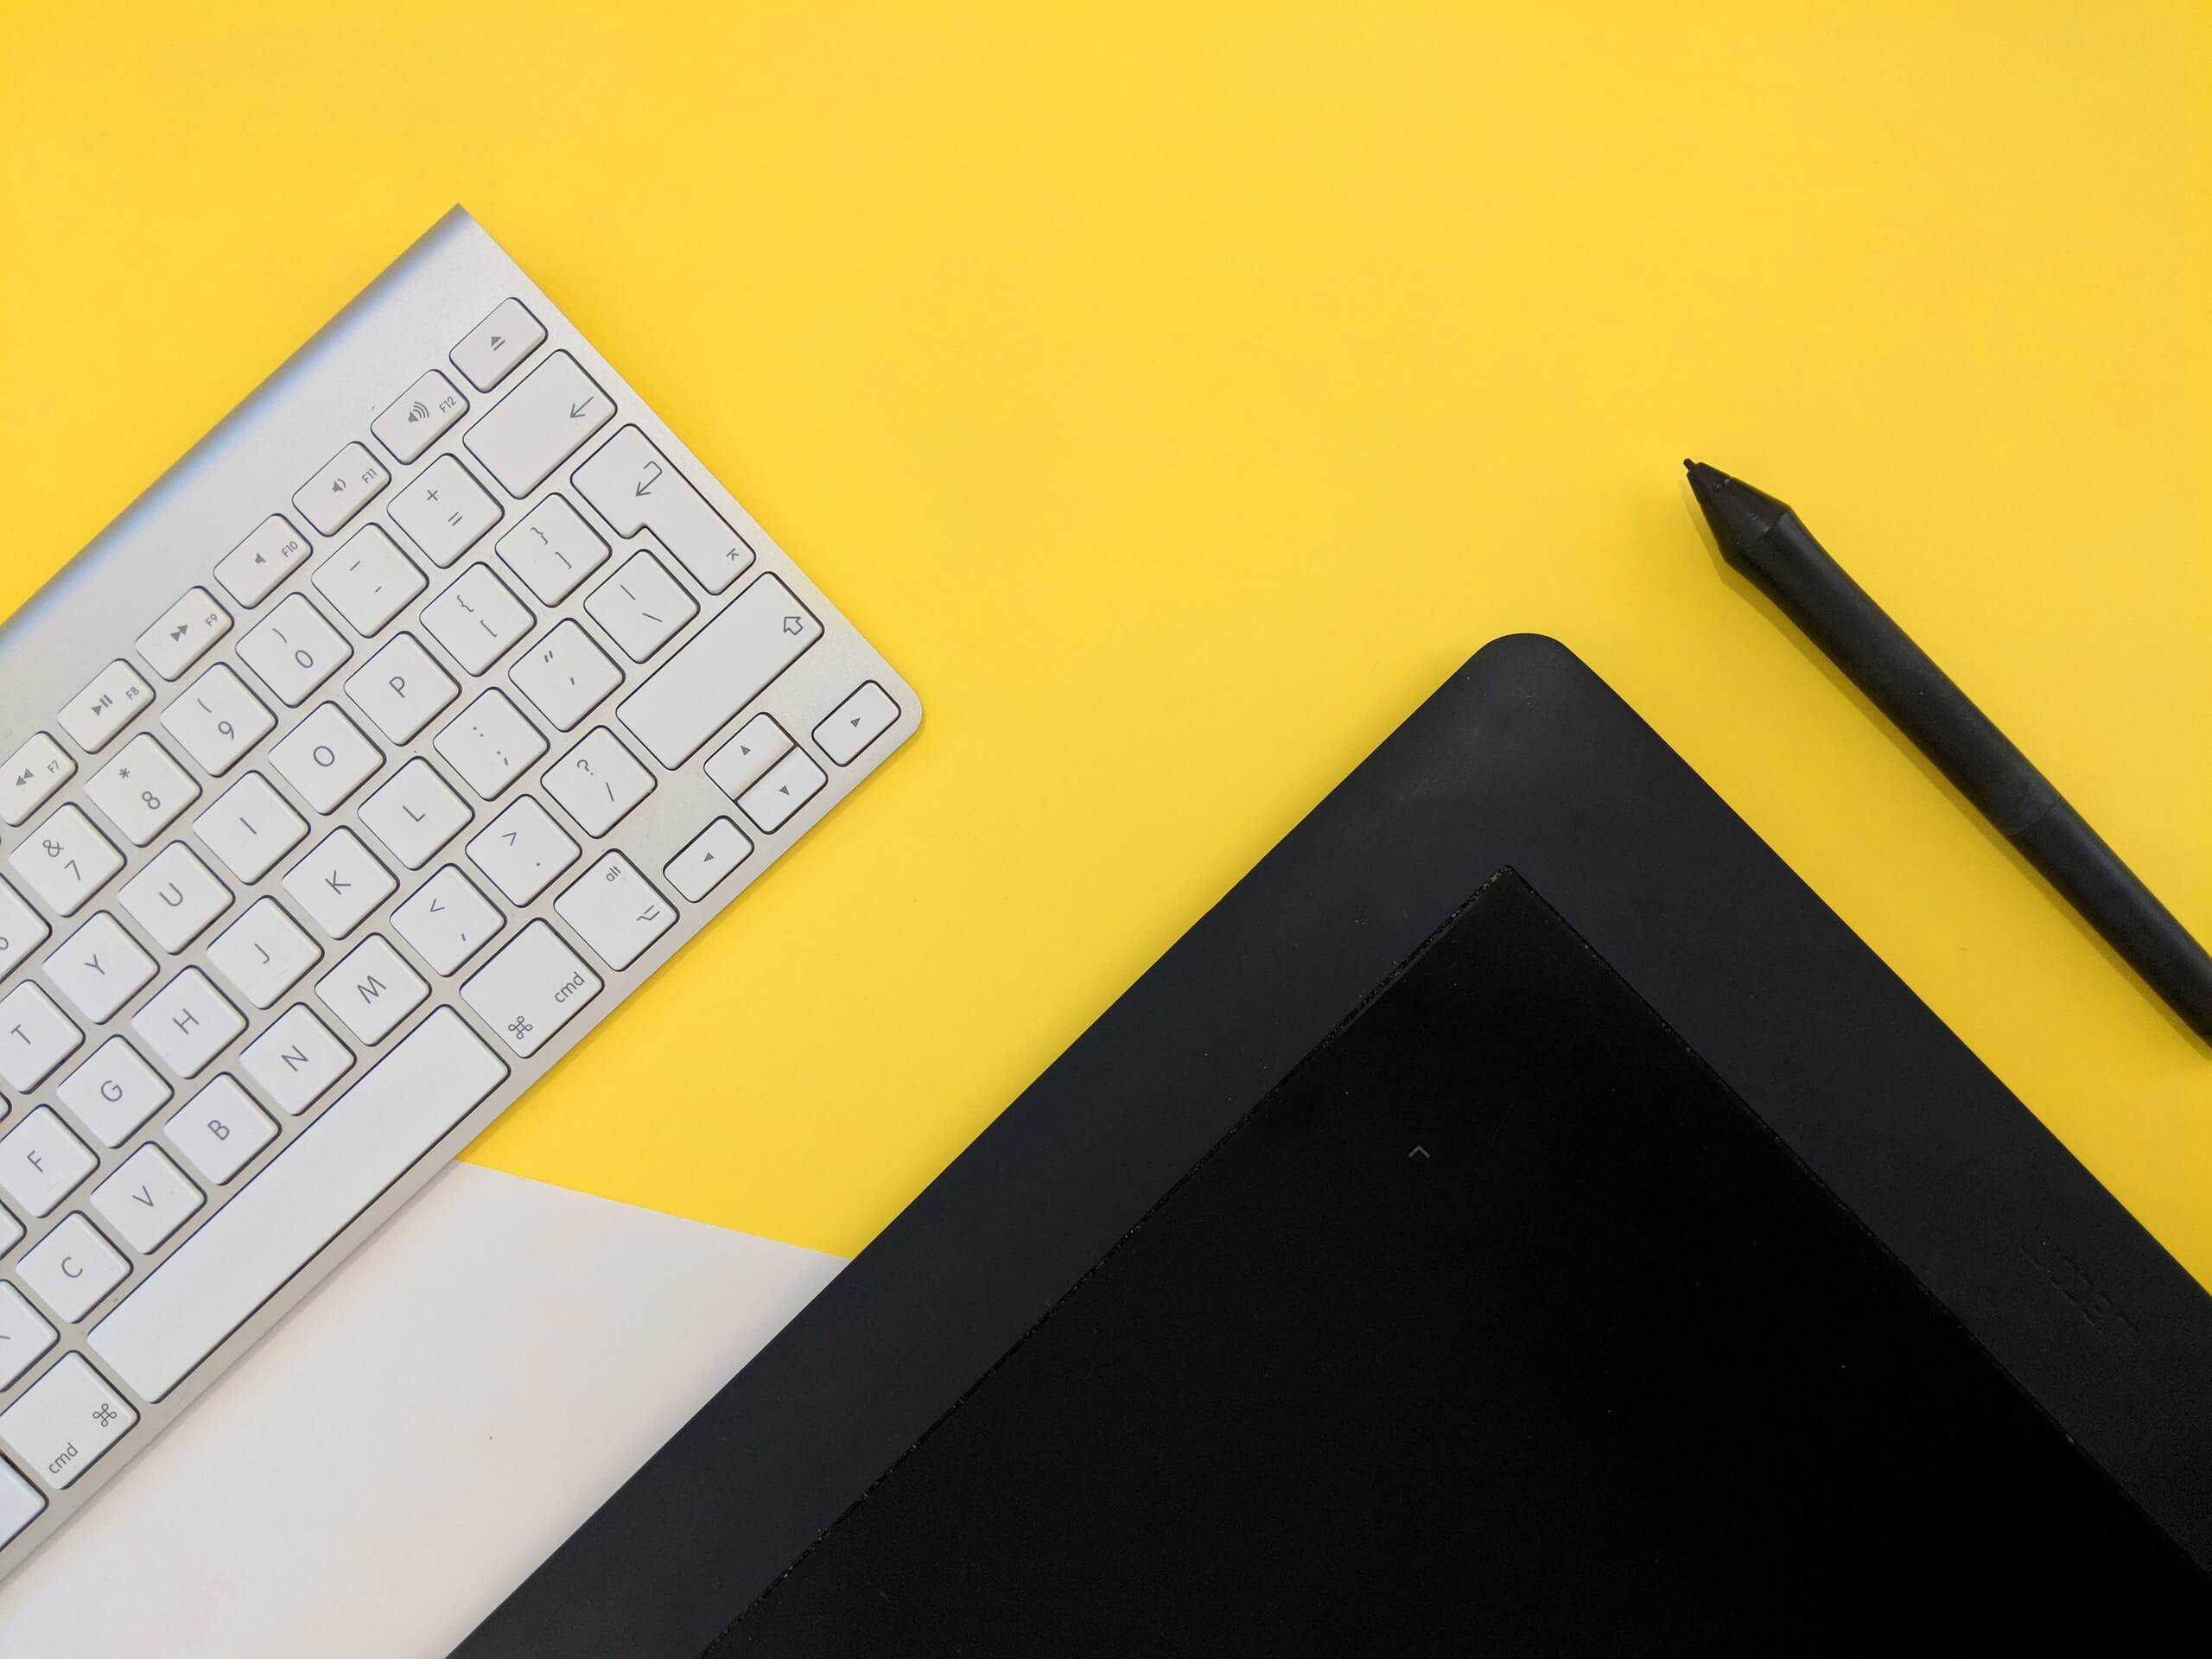 A white Apple keyboard and black iPad sit on a yellow desk or tabletop.